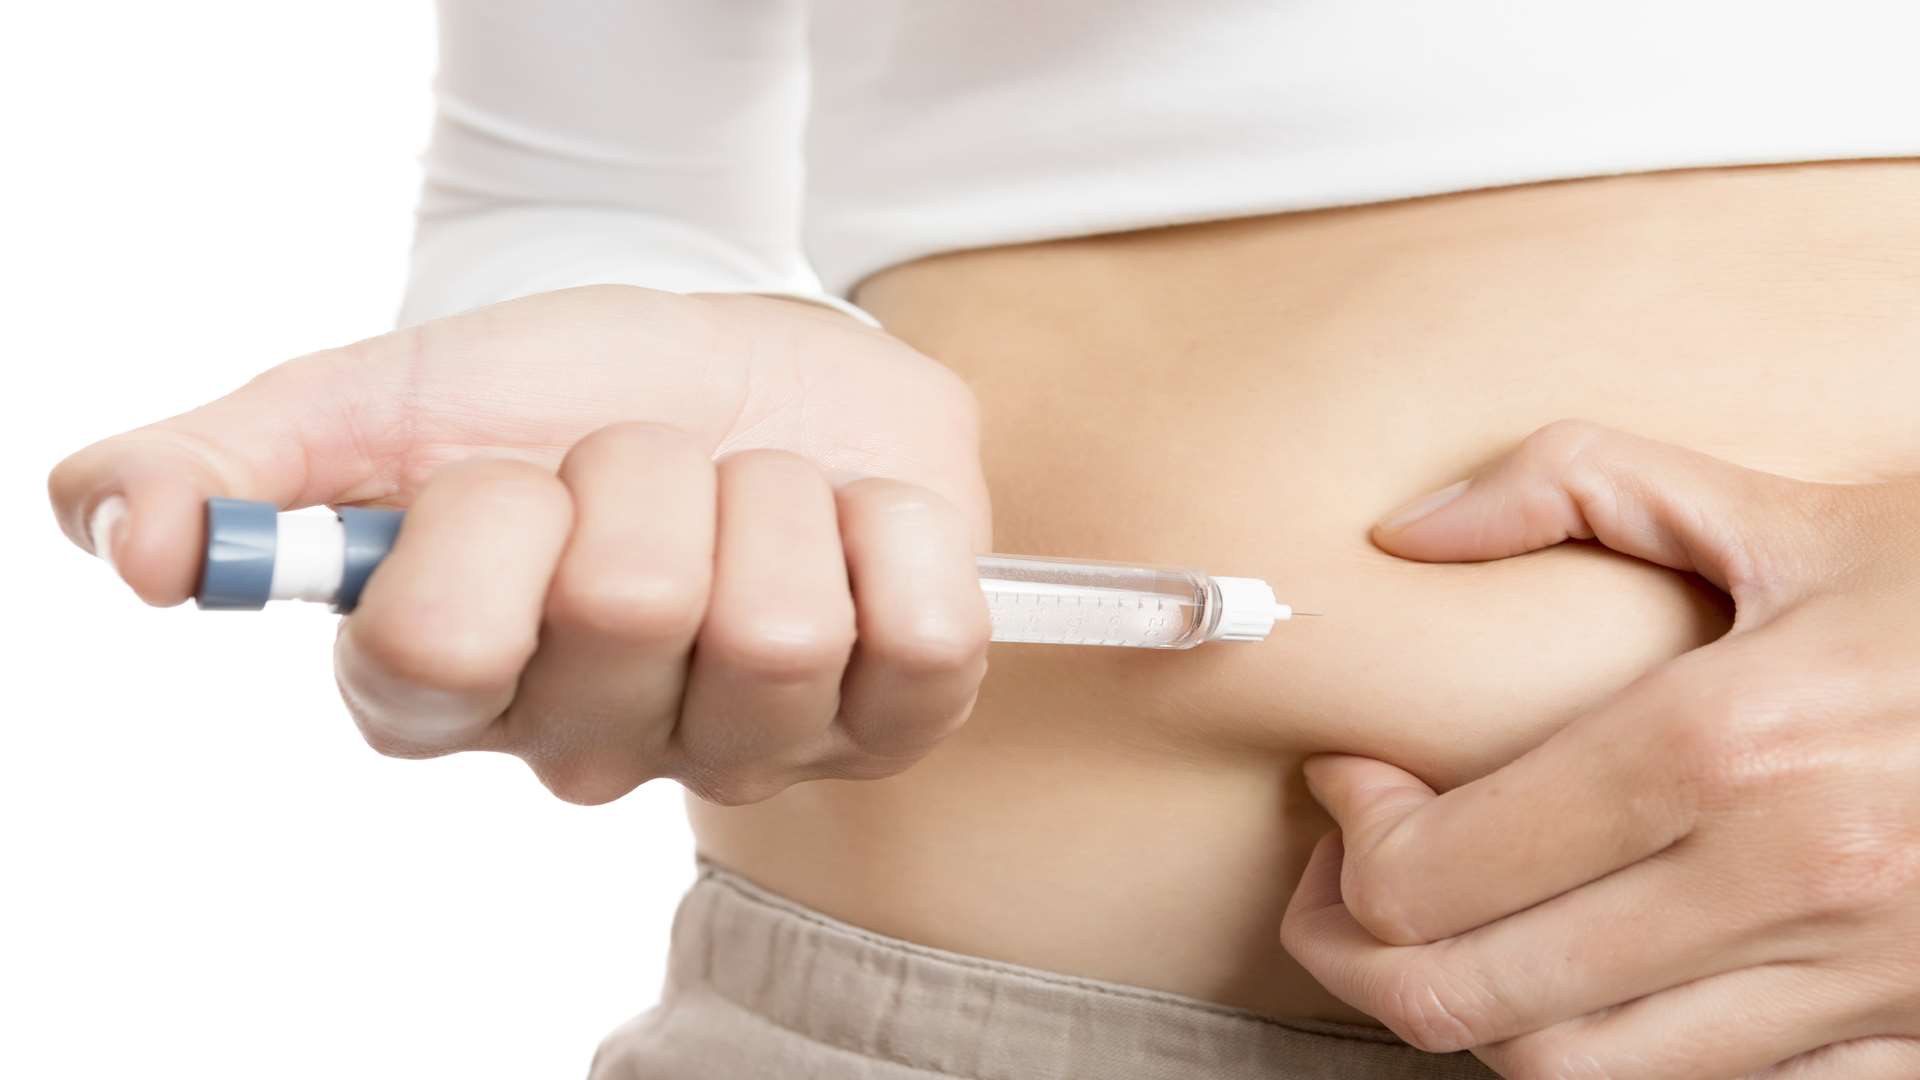 A new diabetes prevention programme will be pioneered in Medway. Injecting insulin, iStock image.